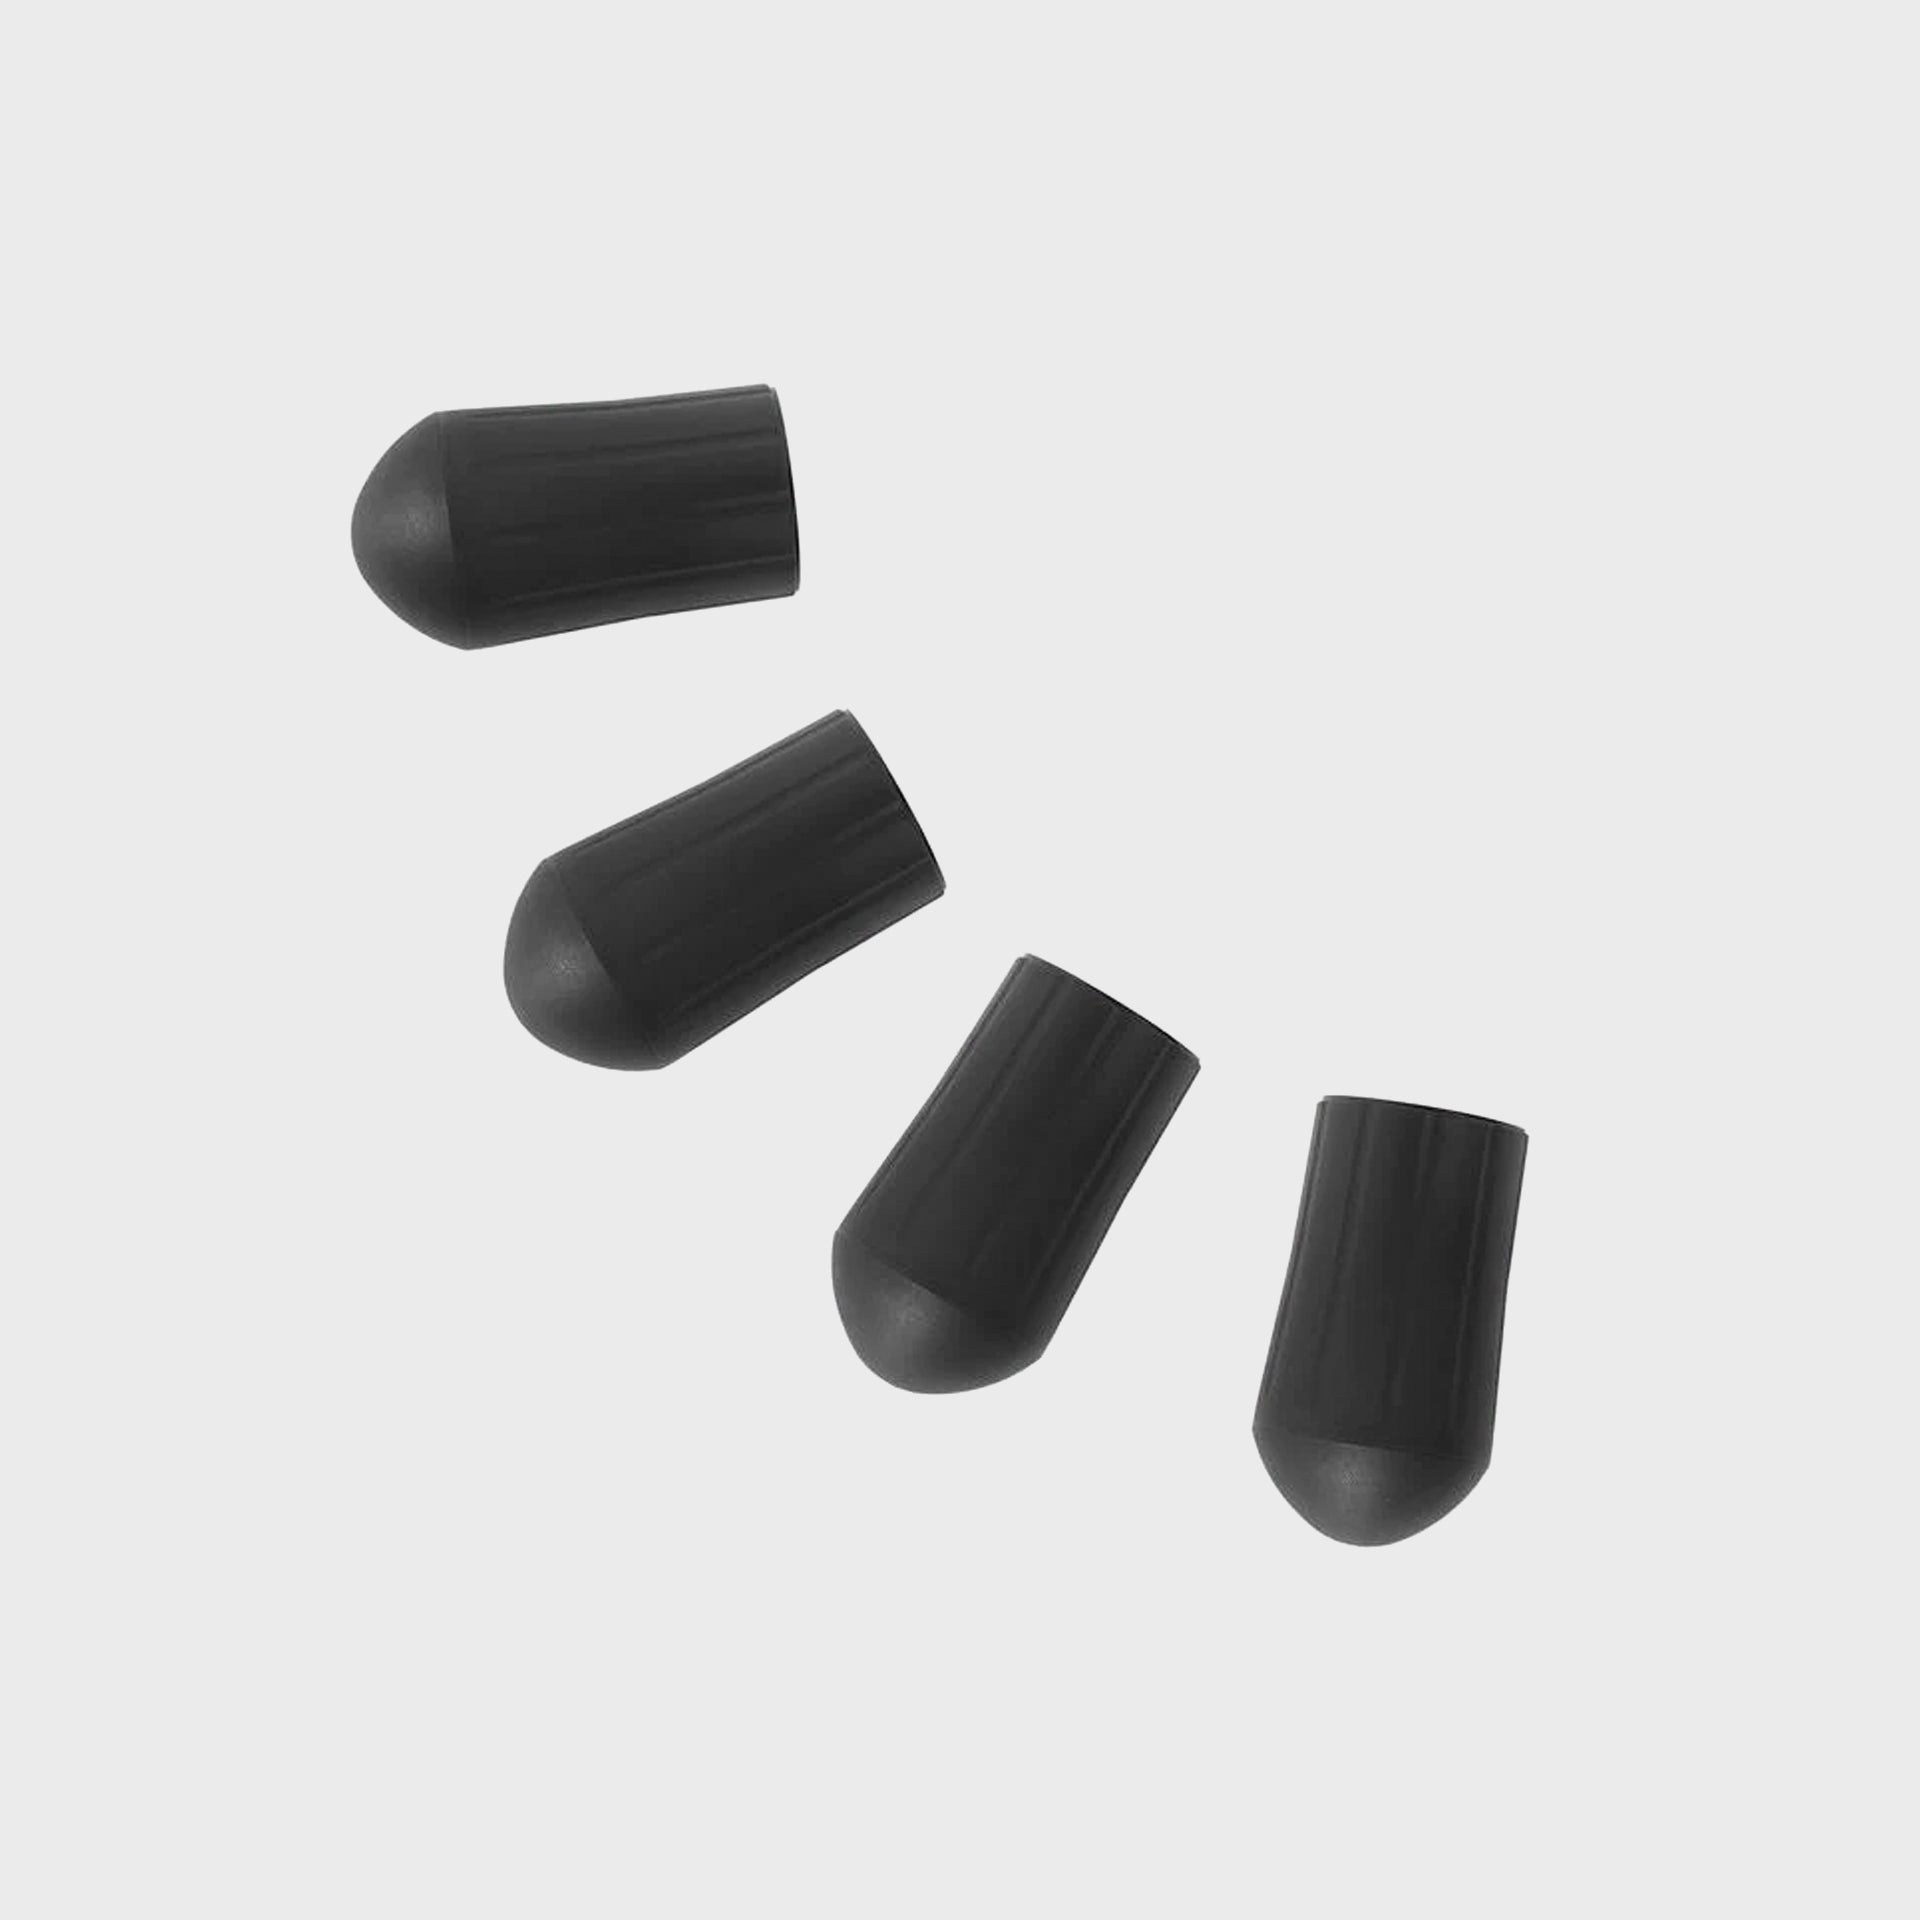 Chair One Rubber Feet Replacement (Set Of 4) - ManGo Surfing